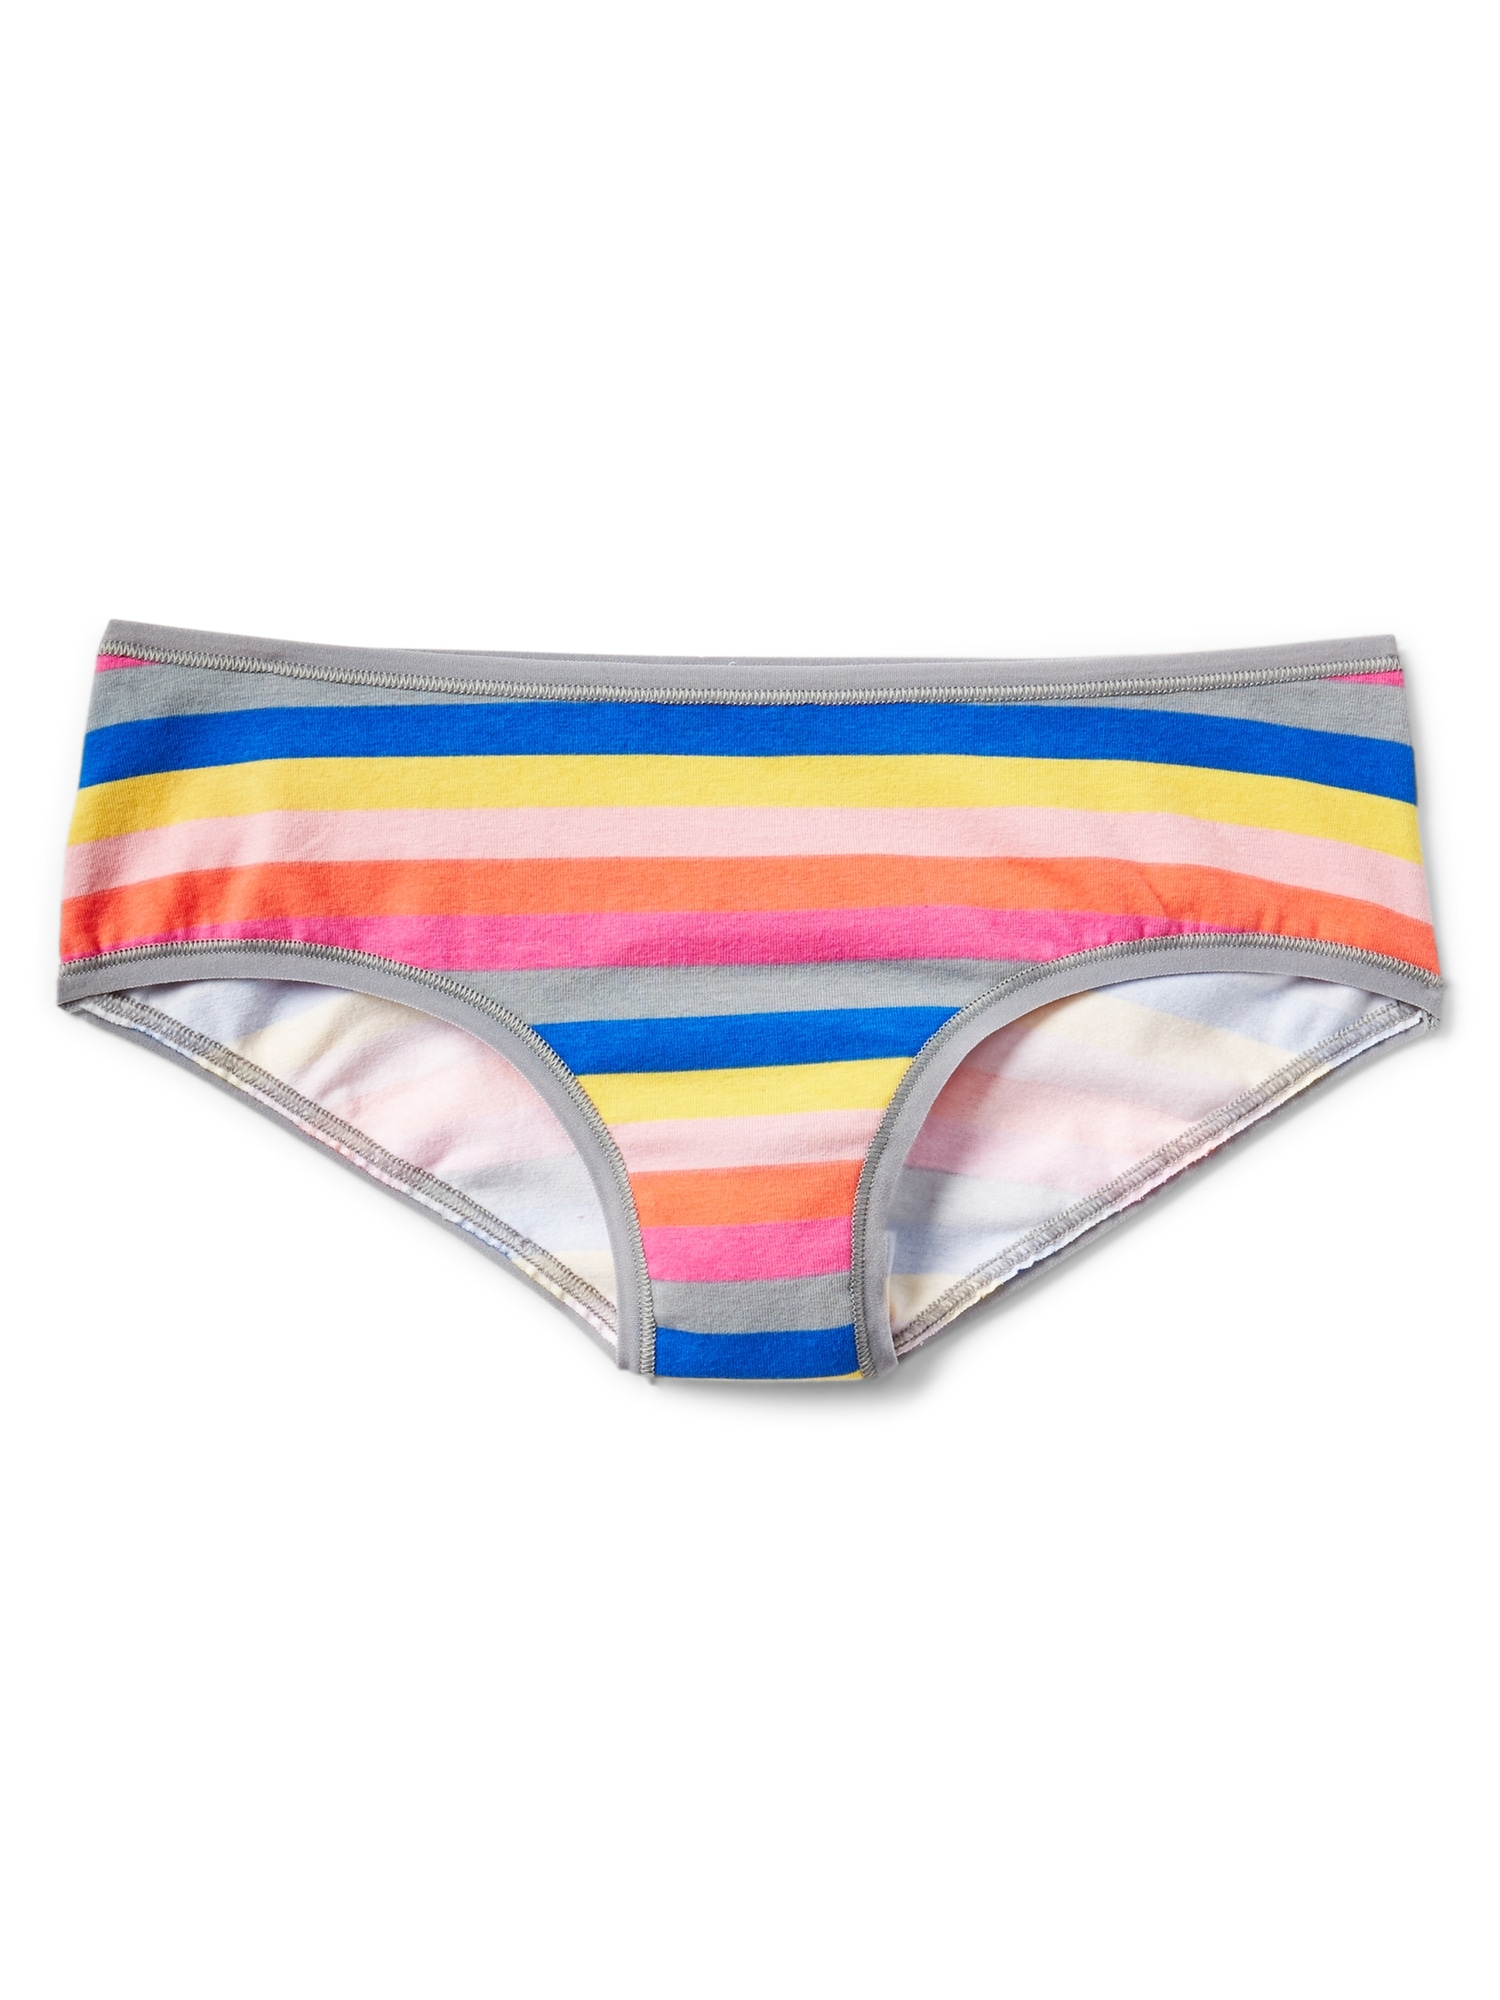 Buy Gap Stretch Cotton Hipster Knickers from the Gap online shop